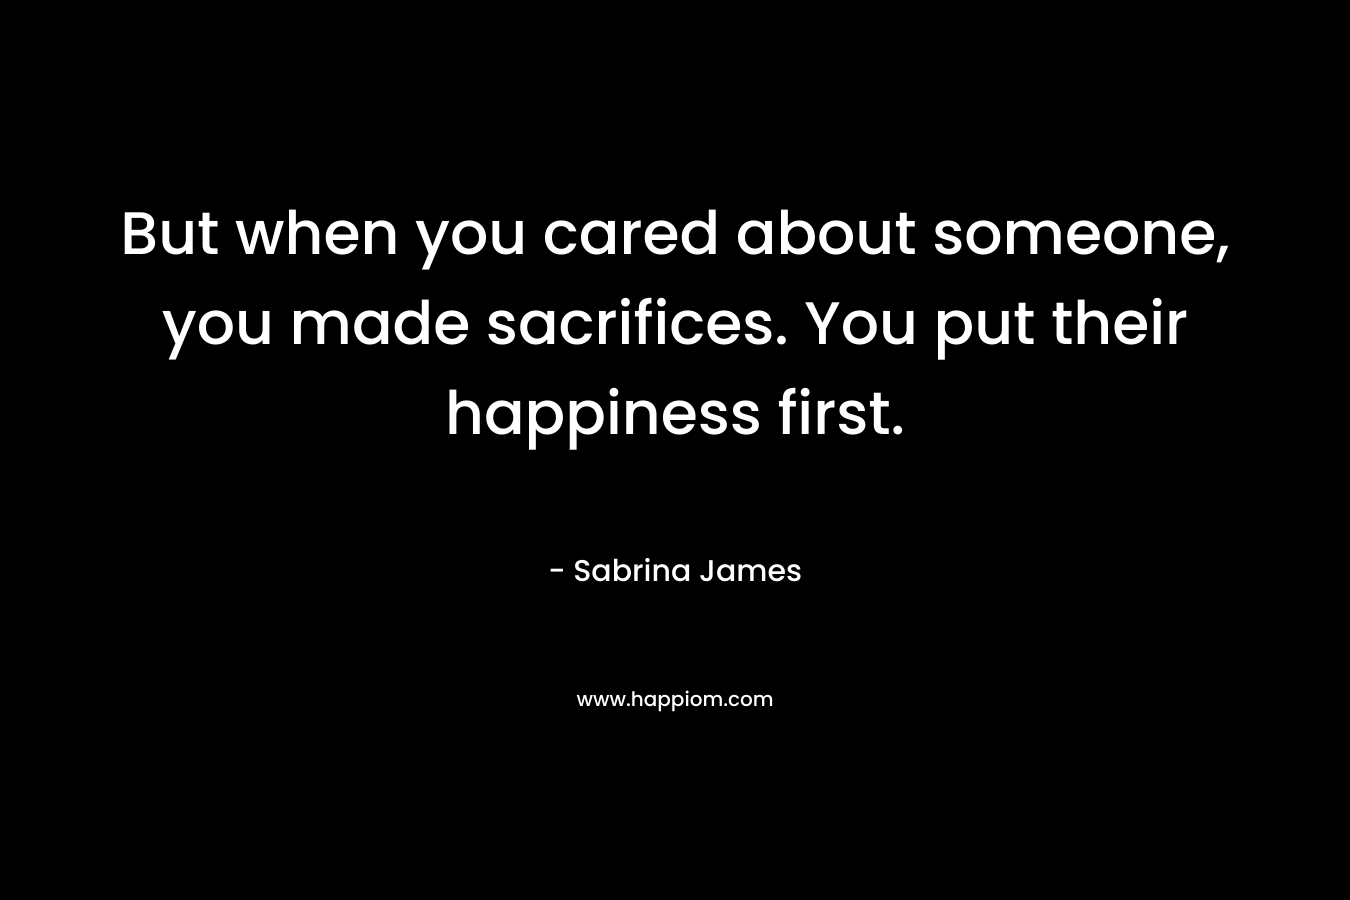 But when you cared about someone, you made sacrifices. You put their happiness first.